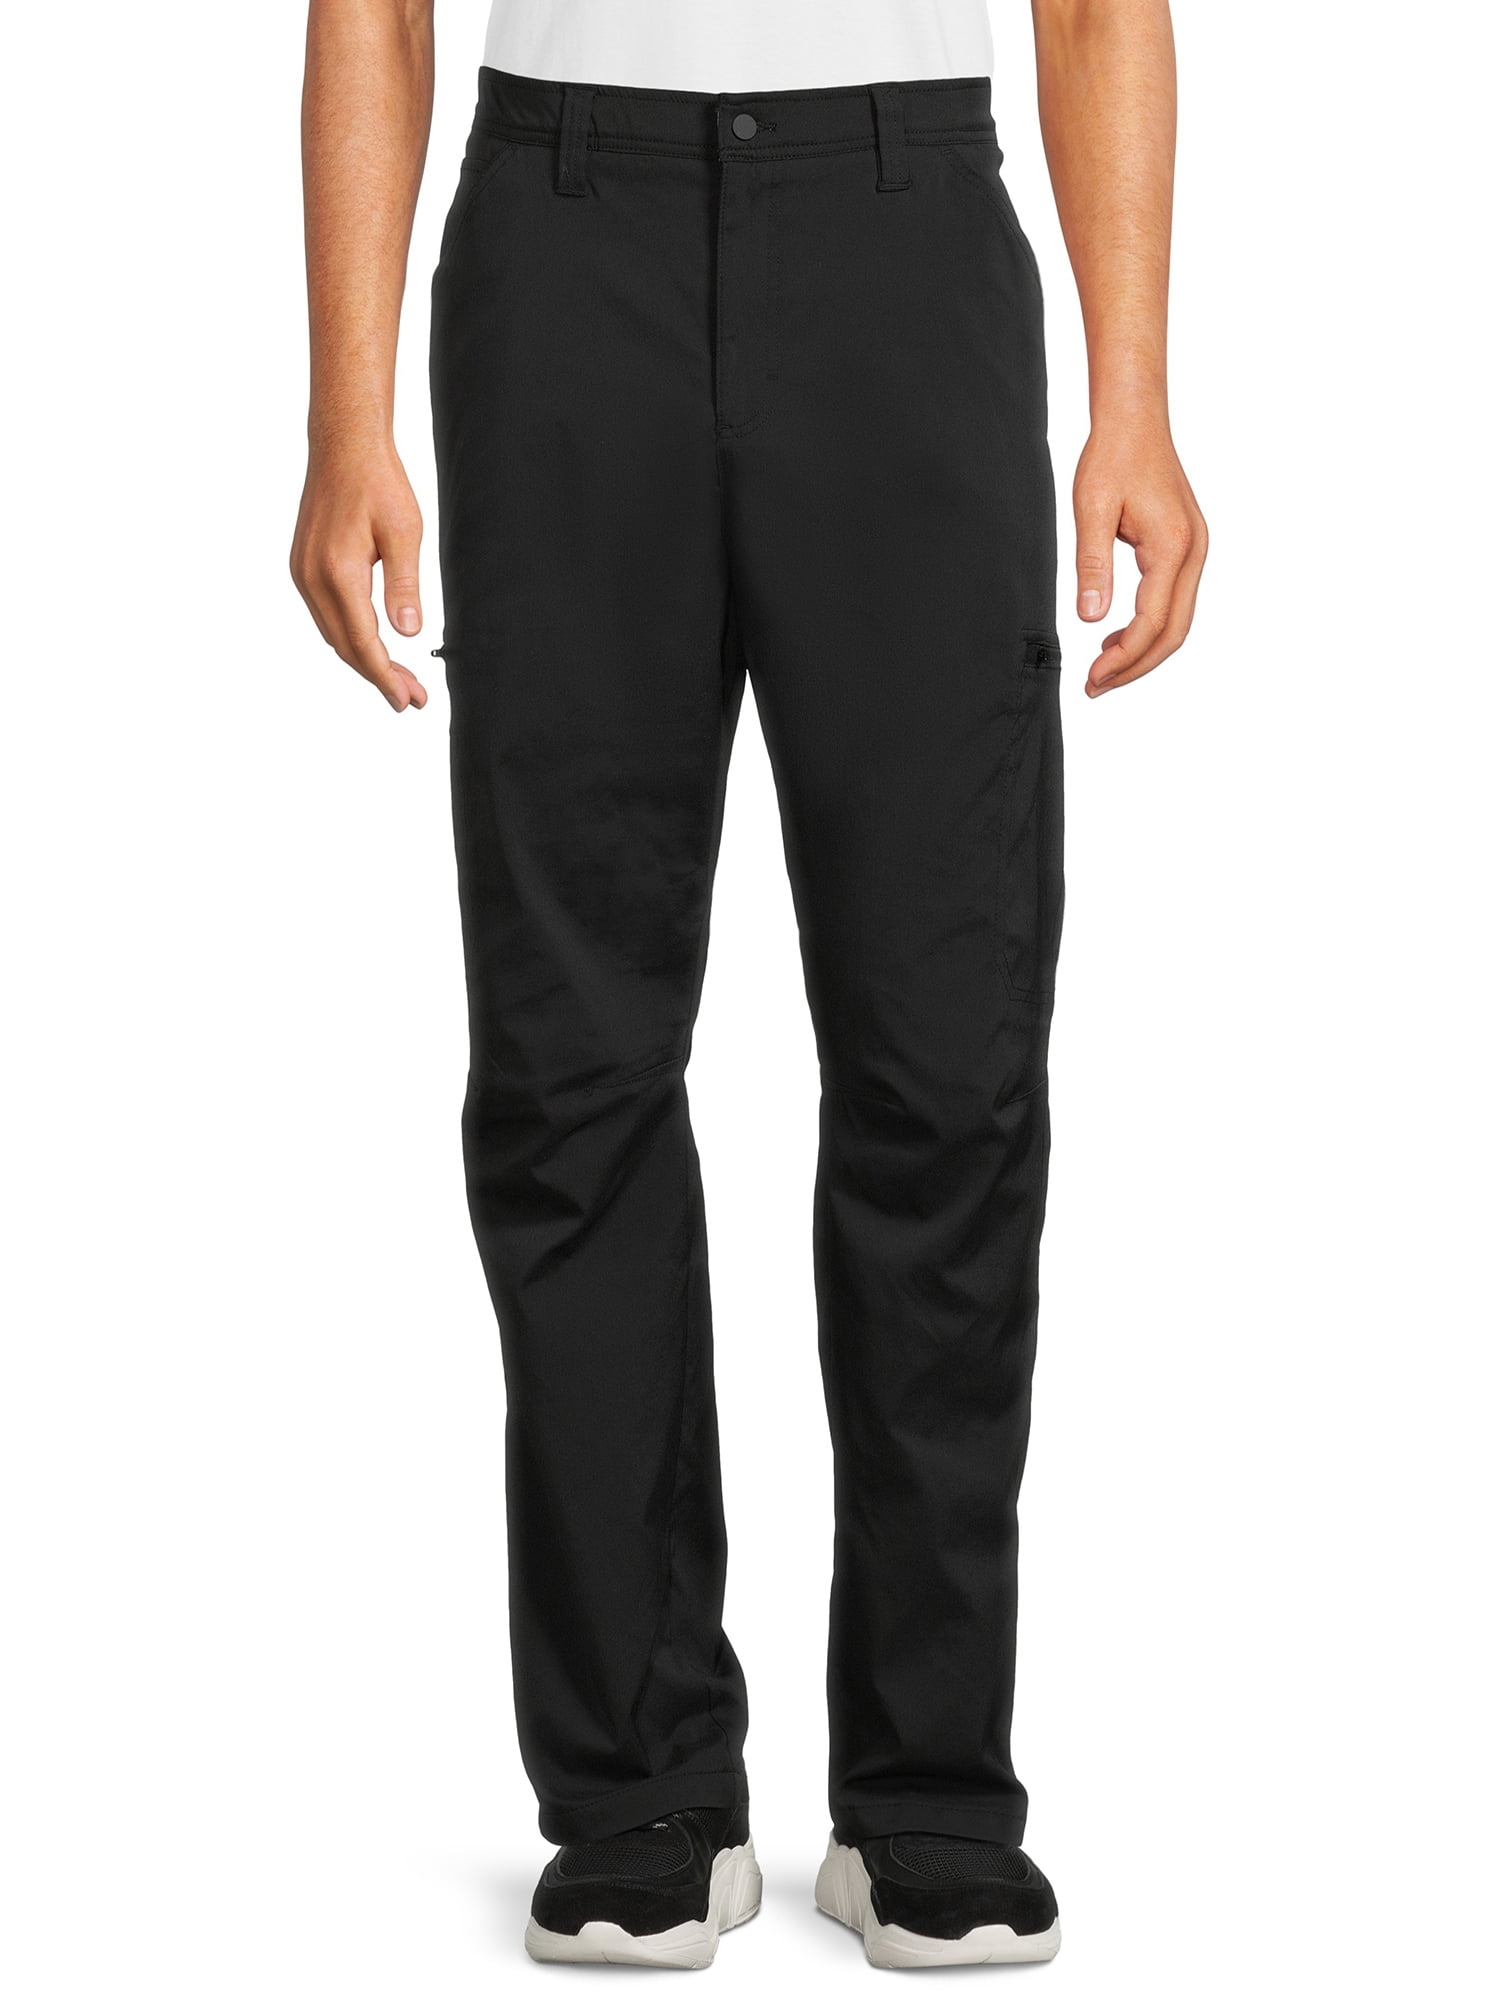 George Men's Synthetic Lined Pants - Walmart.com